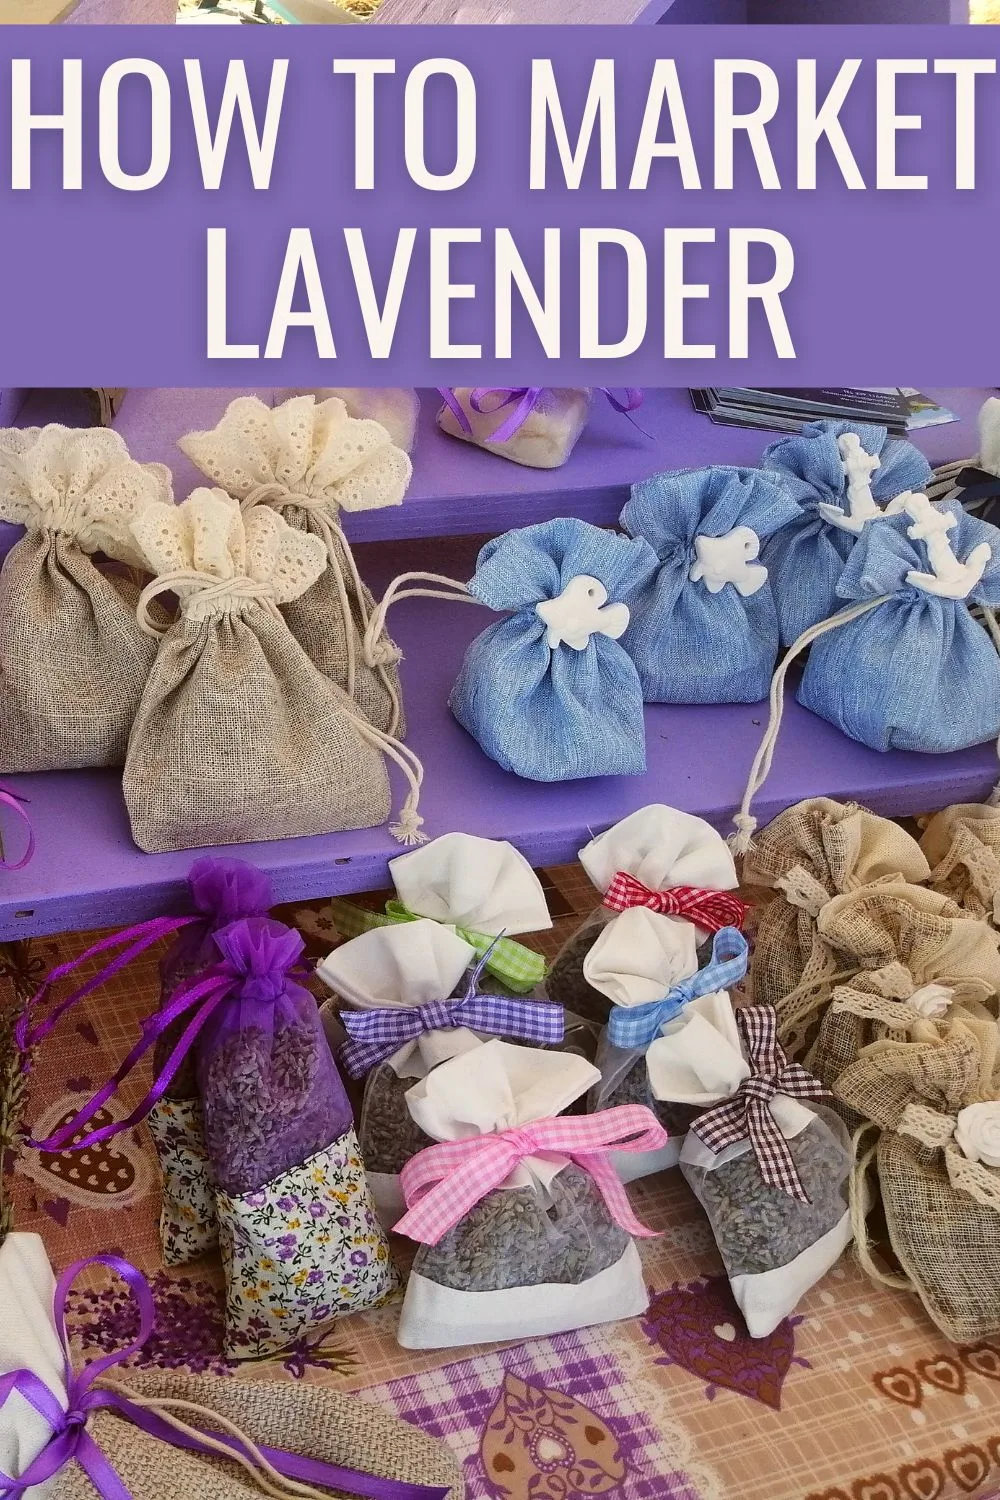 How to market lavender.